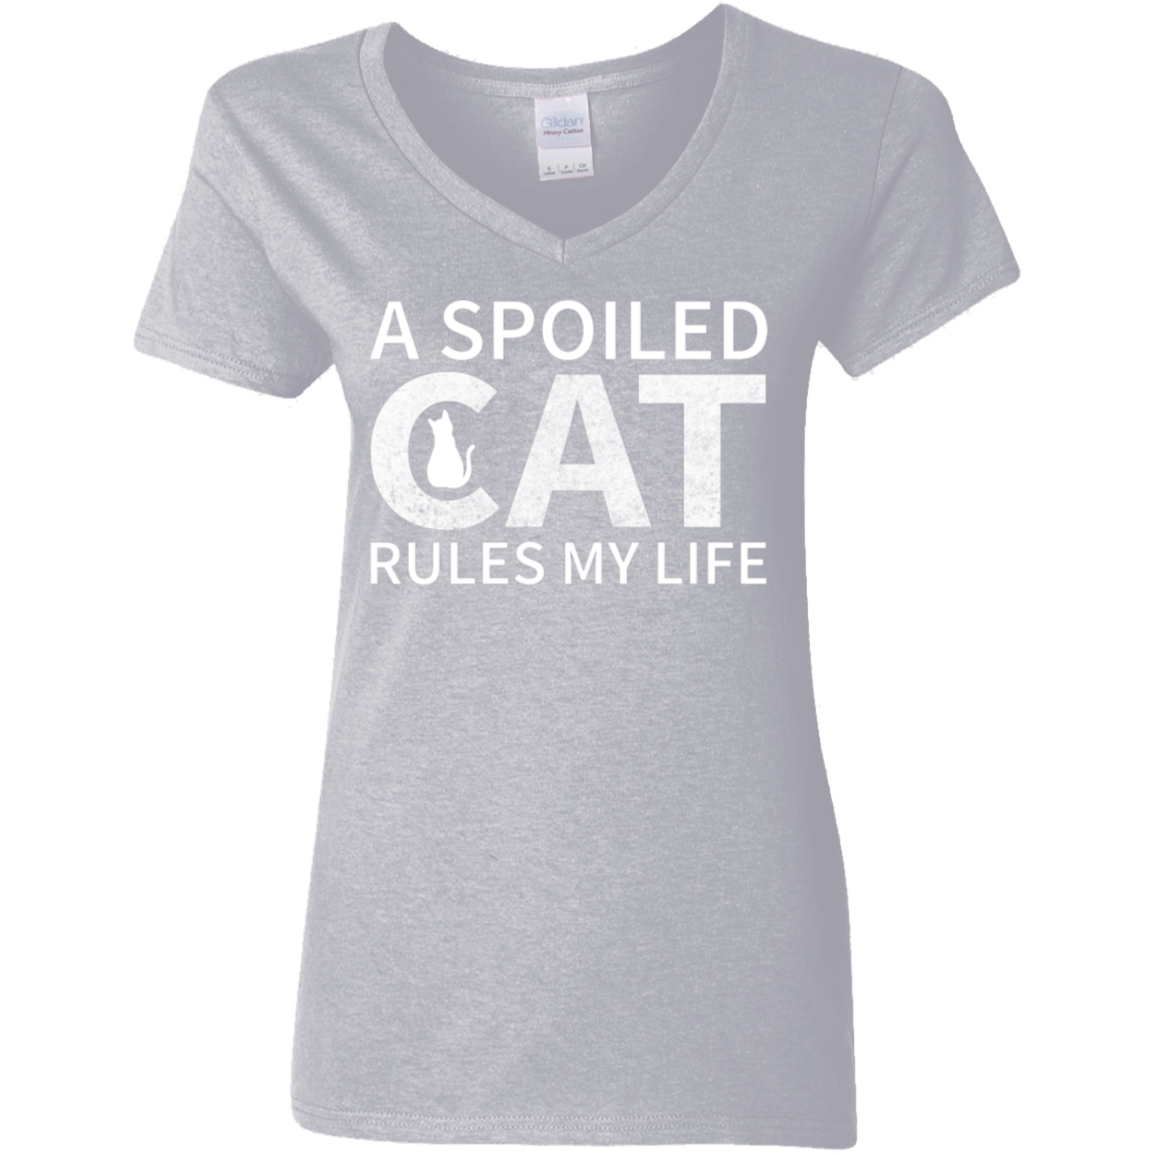 A Spoiled Cat - Ladies V Neck.